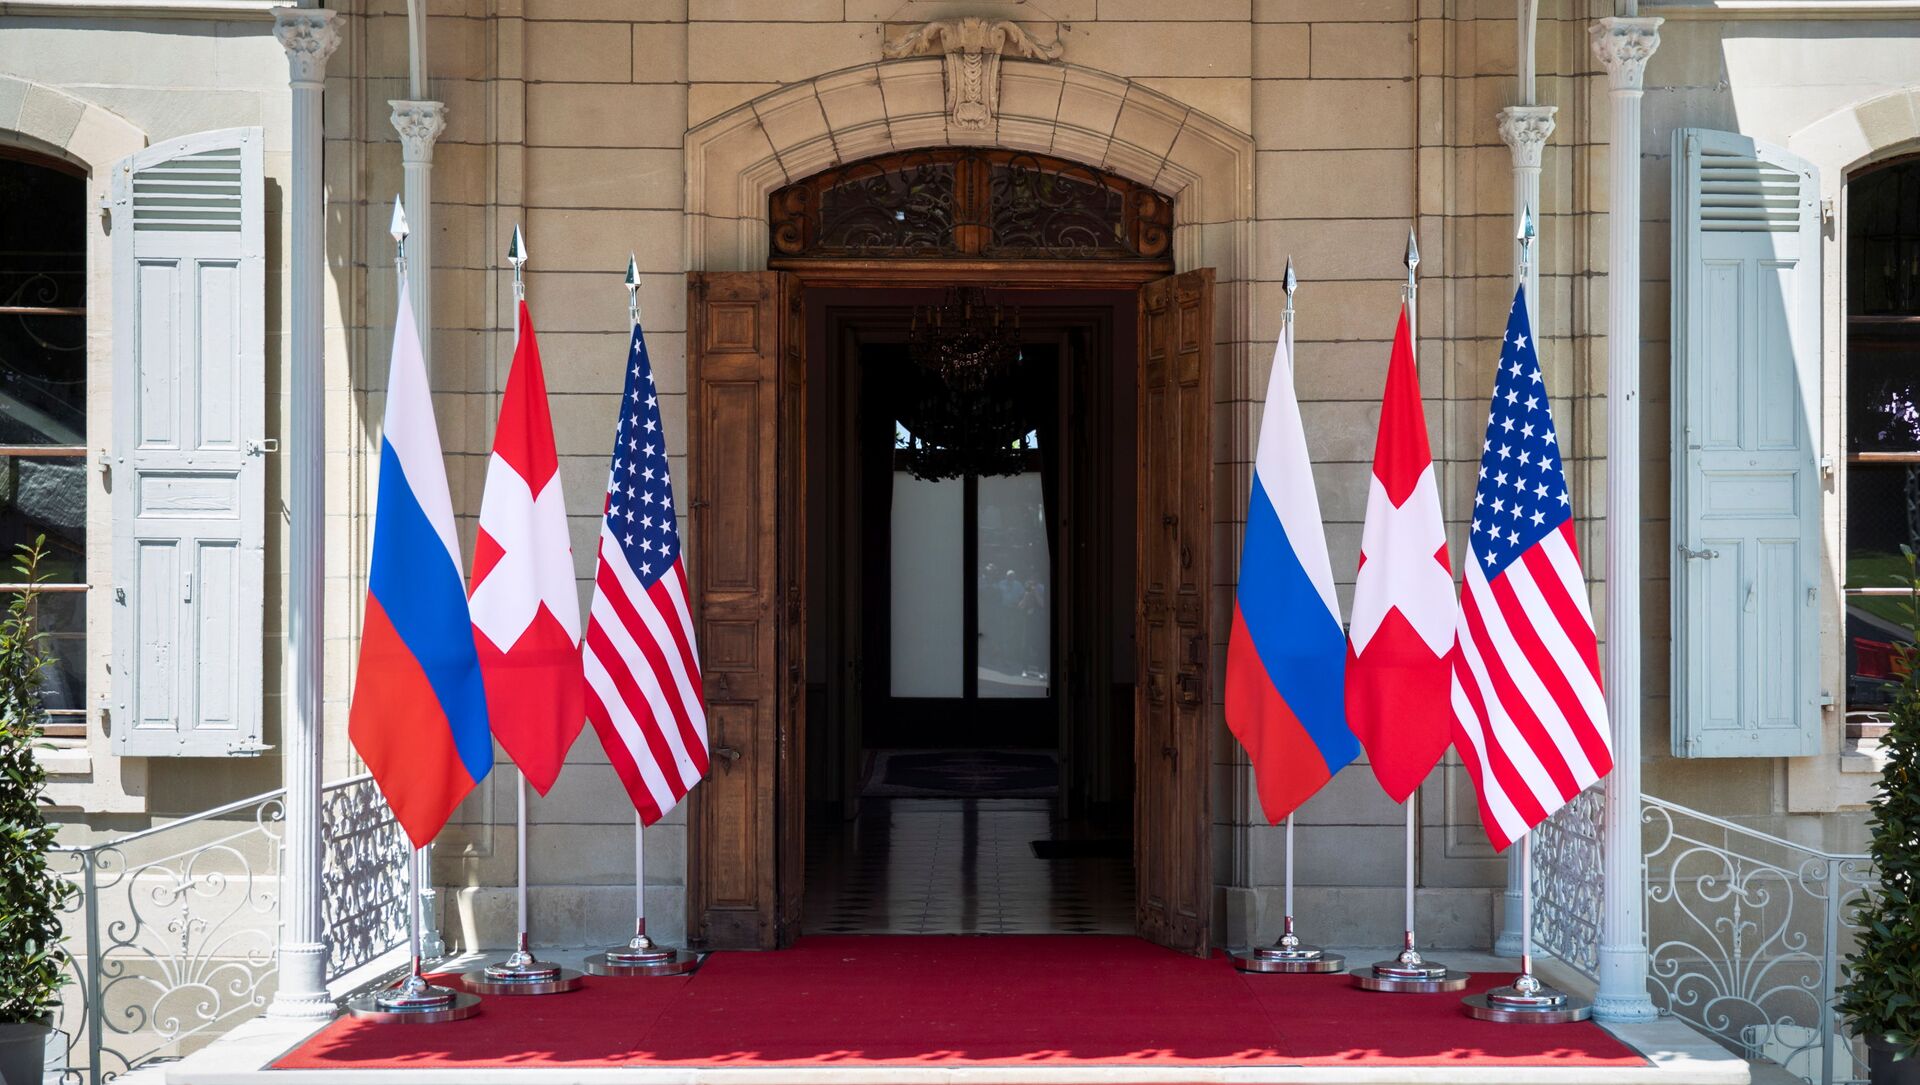 Flags of the U.S., Russia and Switzerland are pictured in front of the entrance of villa La Grange, one day prior to the meeting of U.S. President Joe Biden and Russian President Vladimir Putin in Geneva, Switzerland June 15, 2021 - Sputnik International, 1920, 16.06.2021